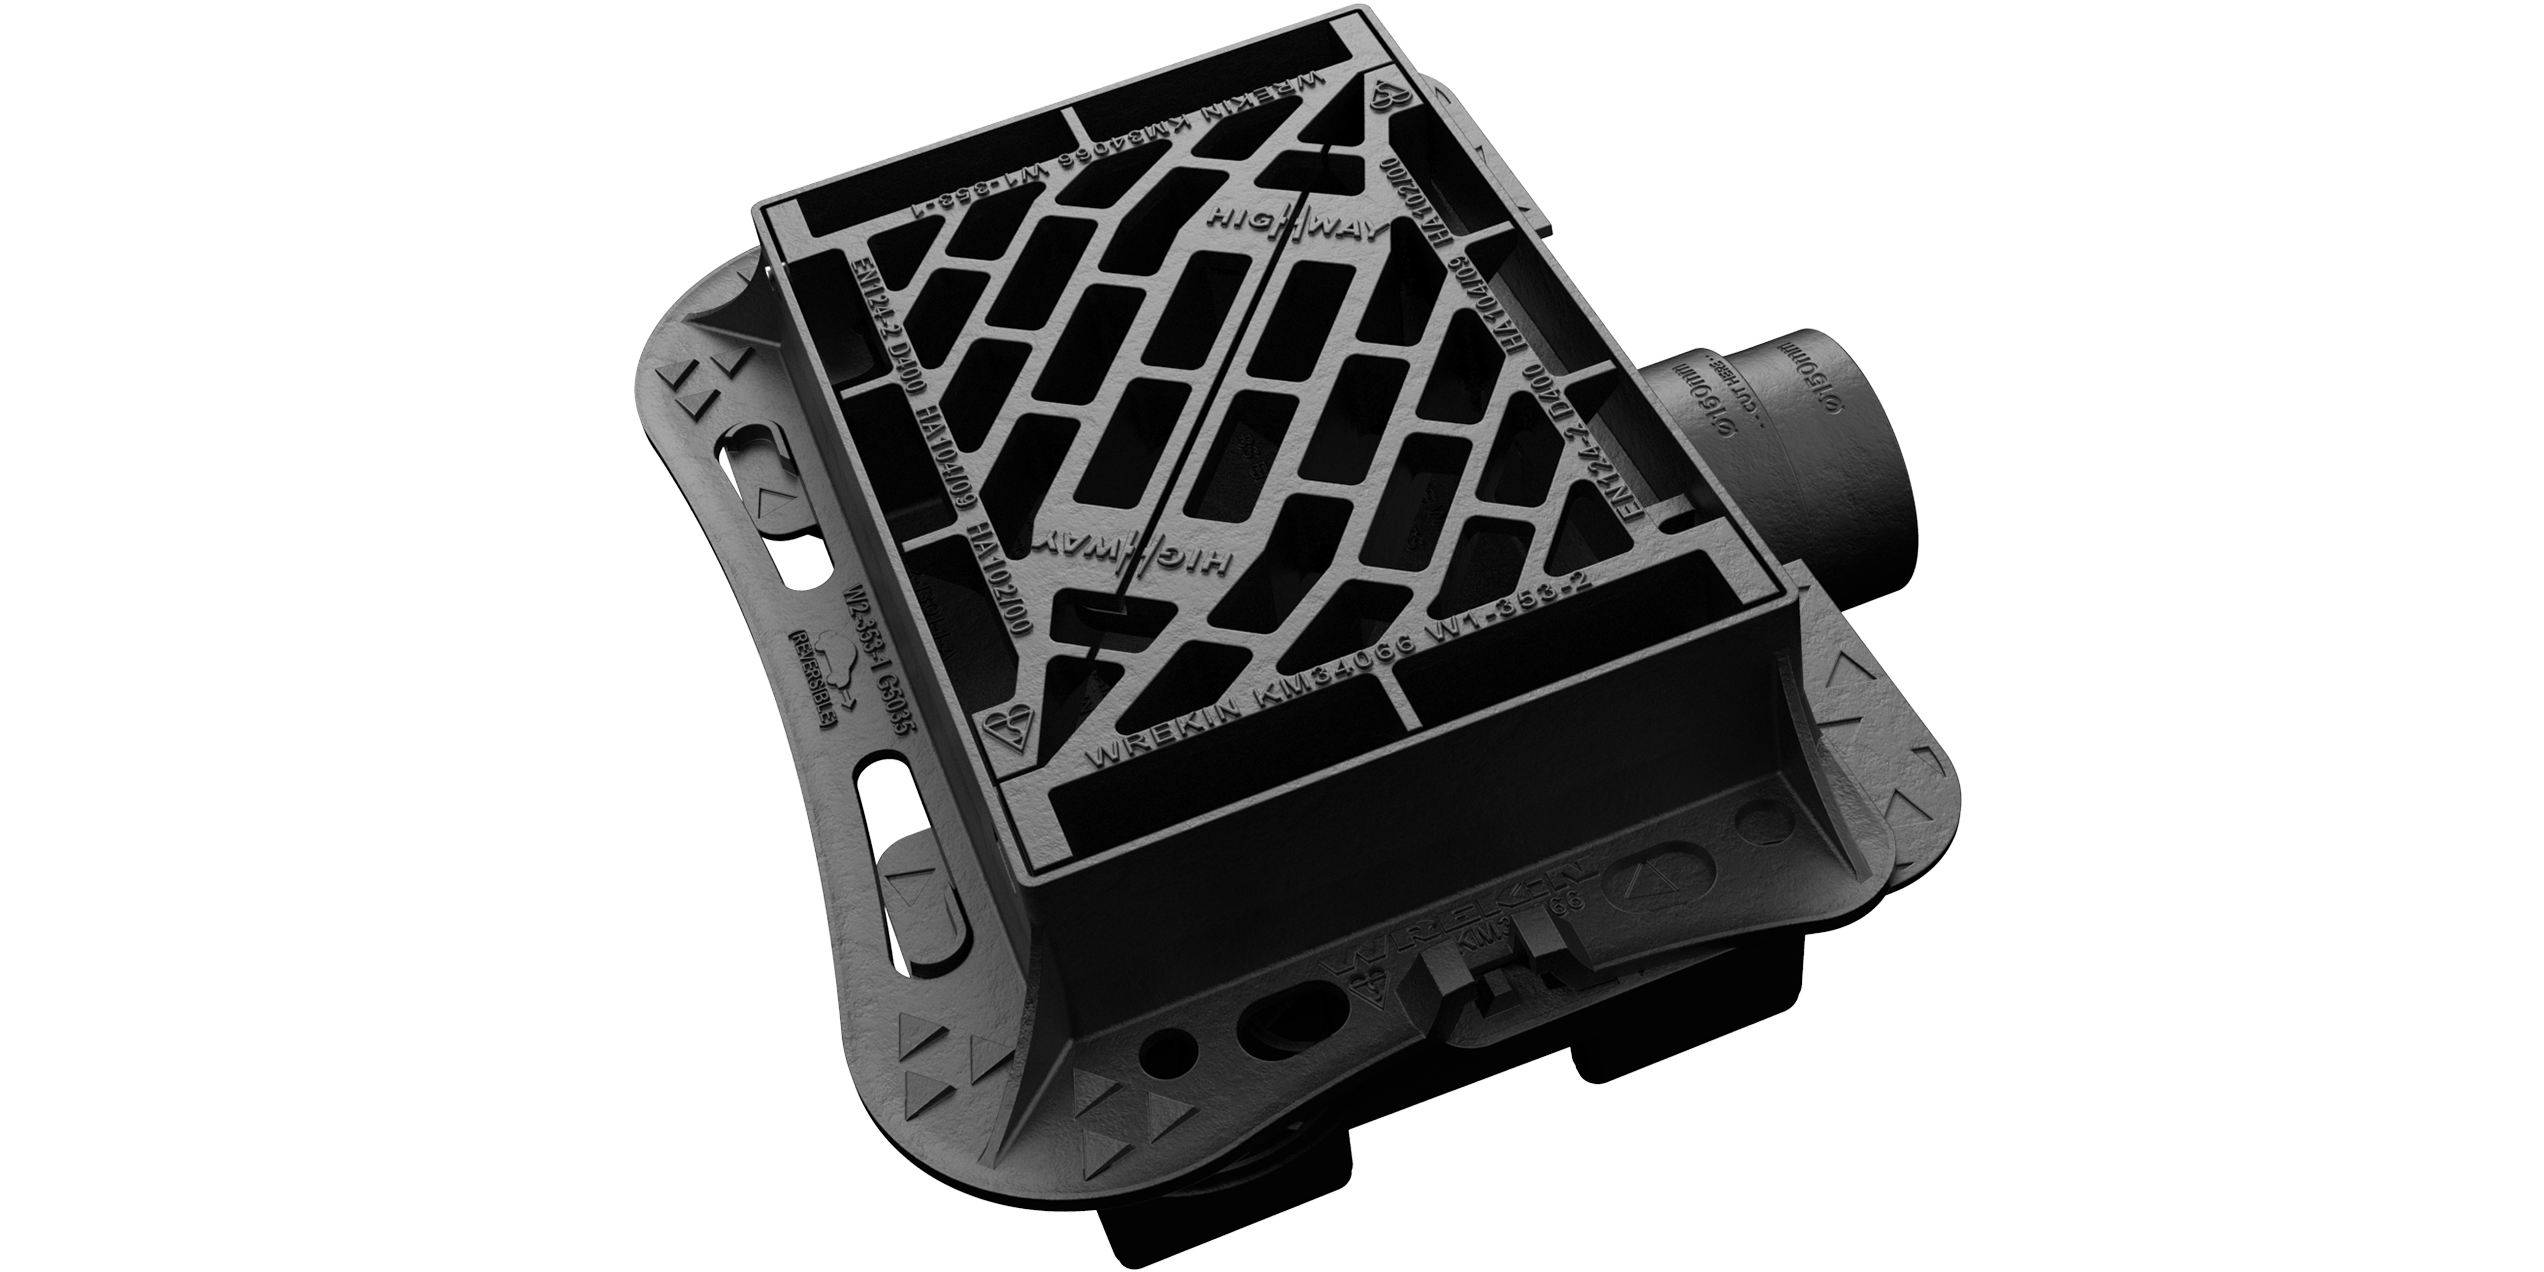 The Gully Grating fitment is fully supported around the whole of its frame flange.